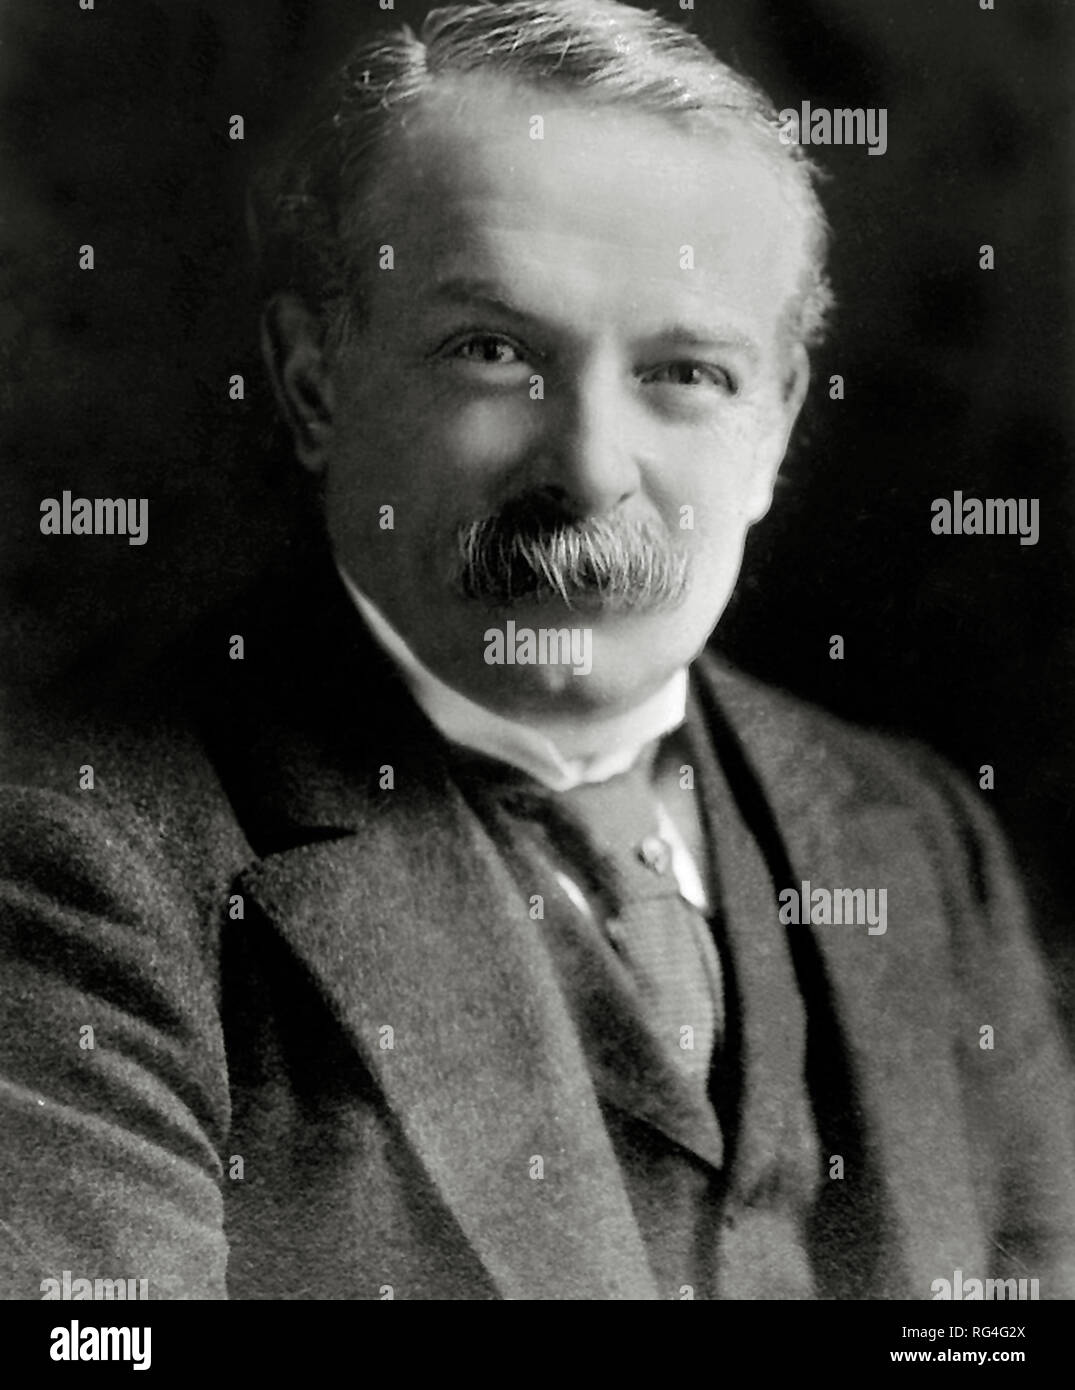 Liberal David Lloyd George formed a coalition government in the United Kingdom in December 1916, and was appointed Prime Minister of the United Kingdom by King George V. Scanned from image material in the archives of Press Portrait Service - (formerly Press Portrait Bureau). Stock Photo